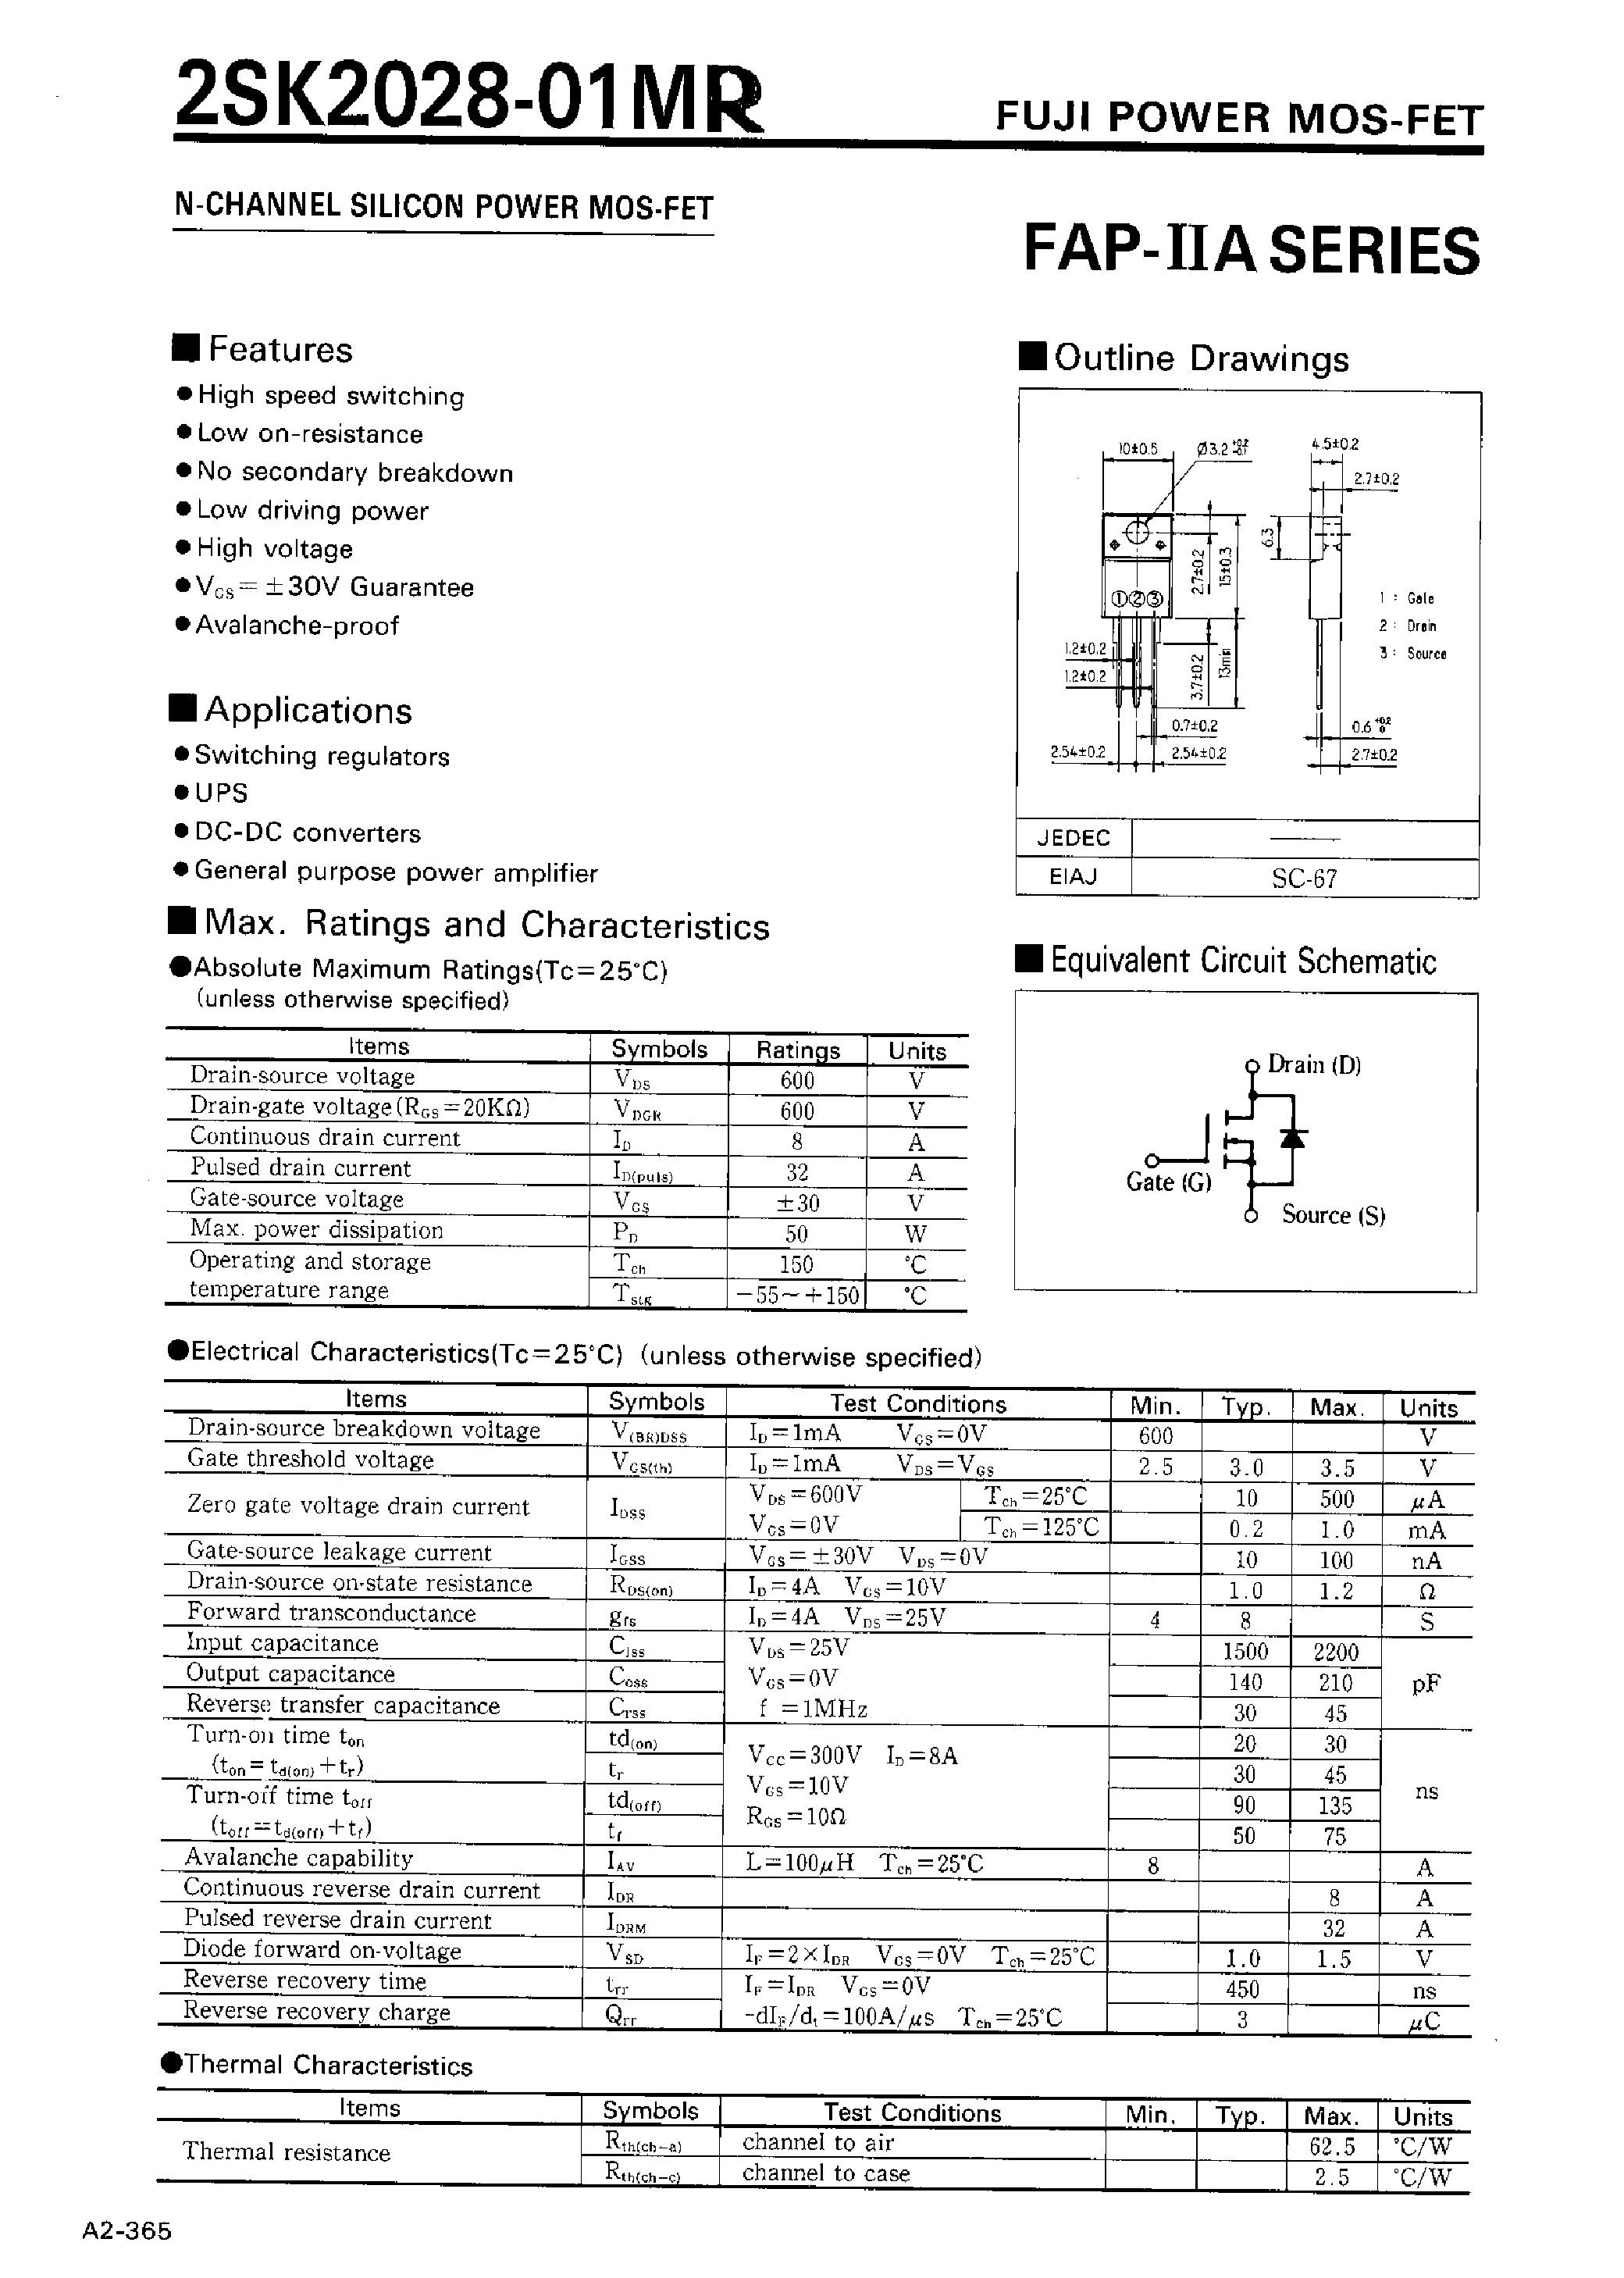 Datasheet 2SK2028-01MR - N-CHANNEL SILICON POWER MOSFET page 1